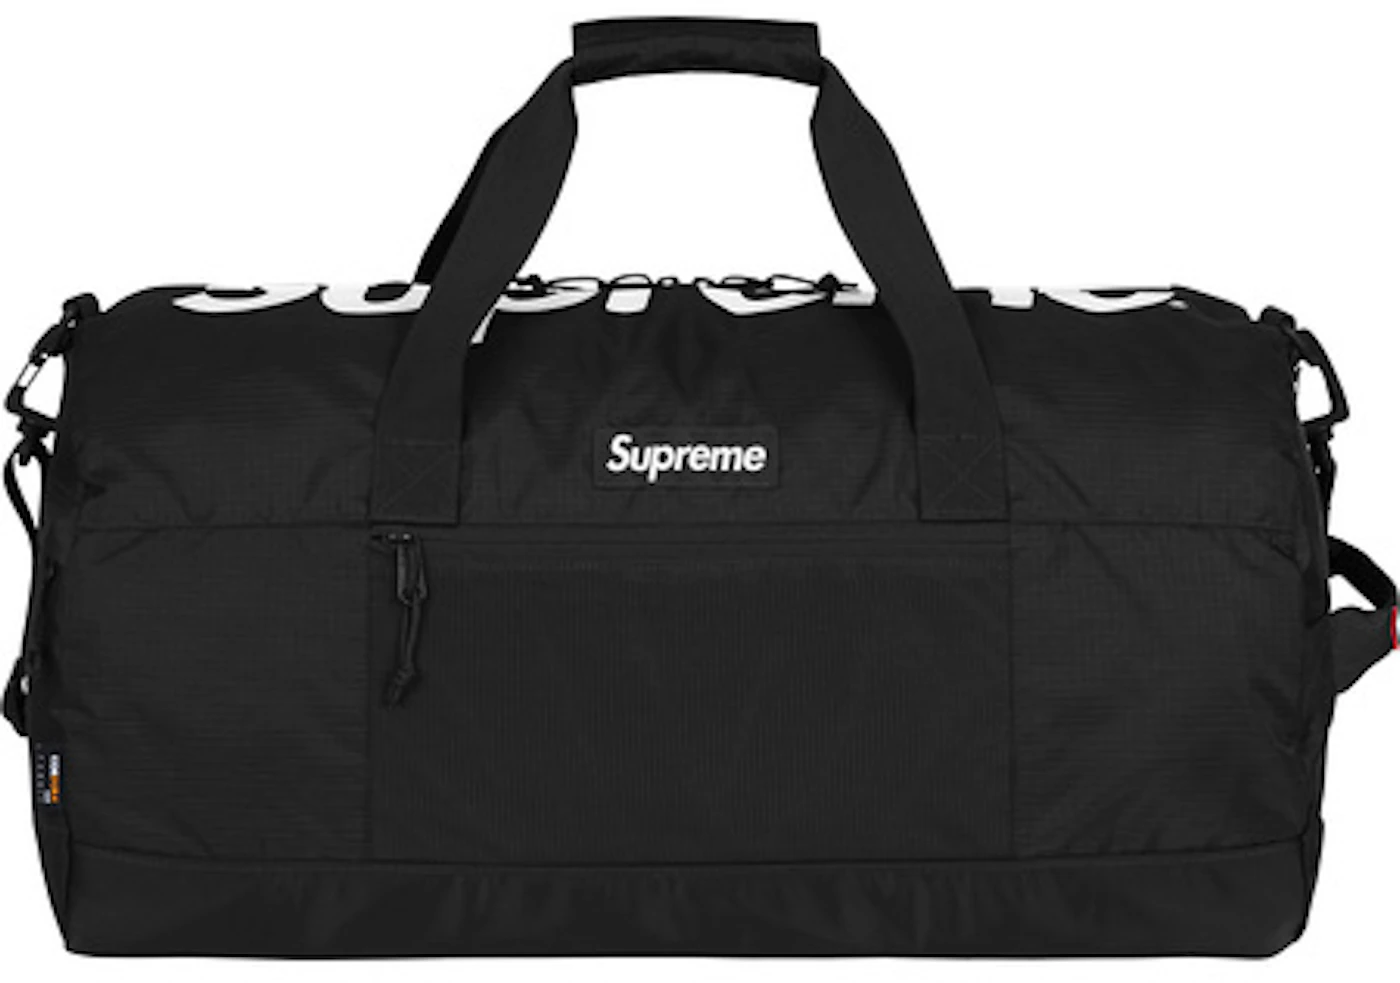 Weistbag supreme ss17 - Vinted